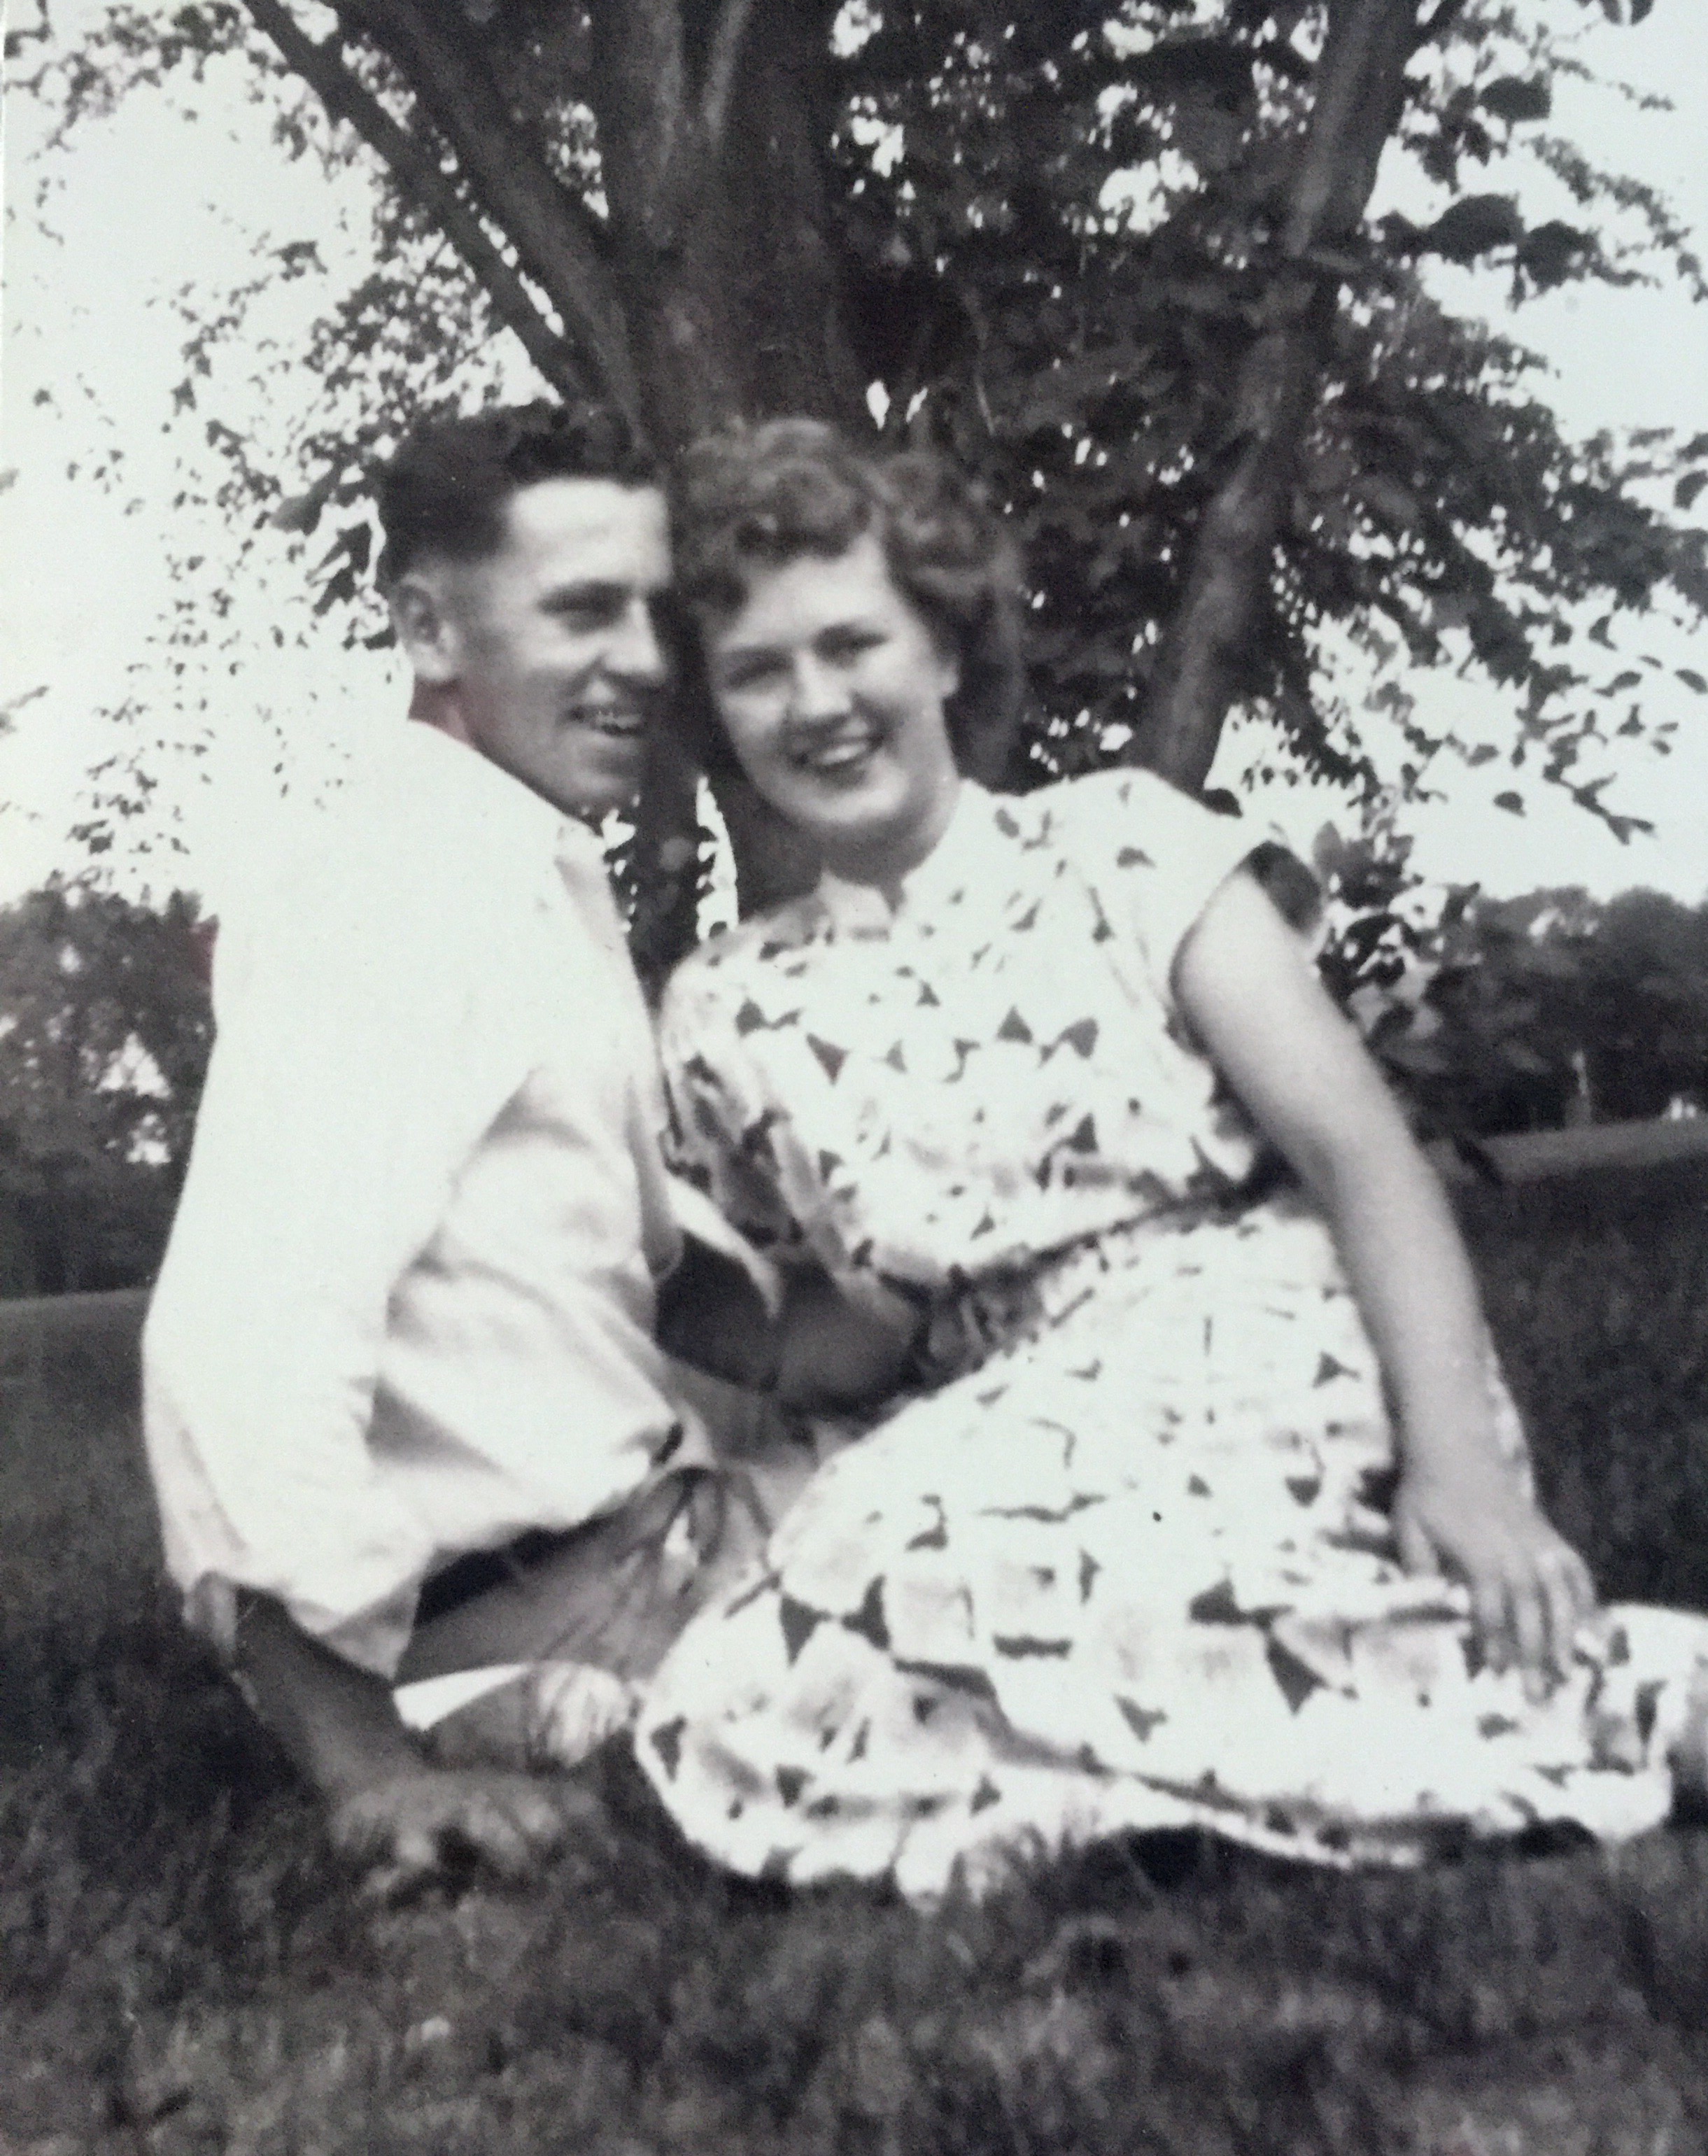 My mom and dad dating in the 1940s